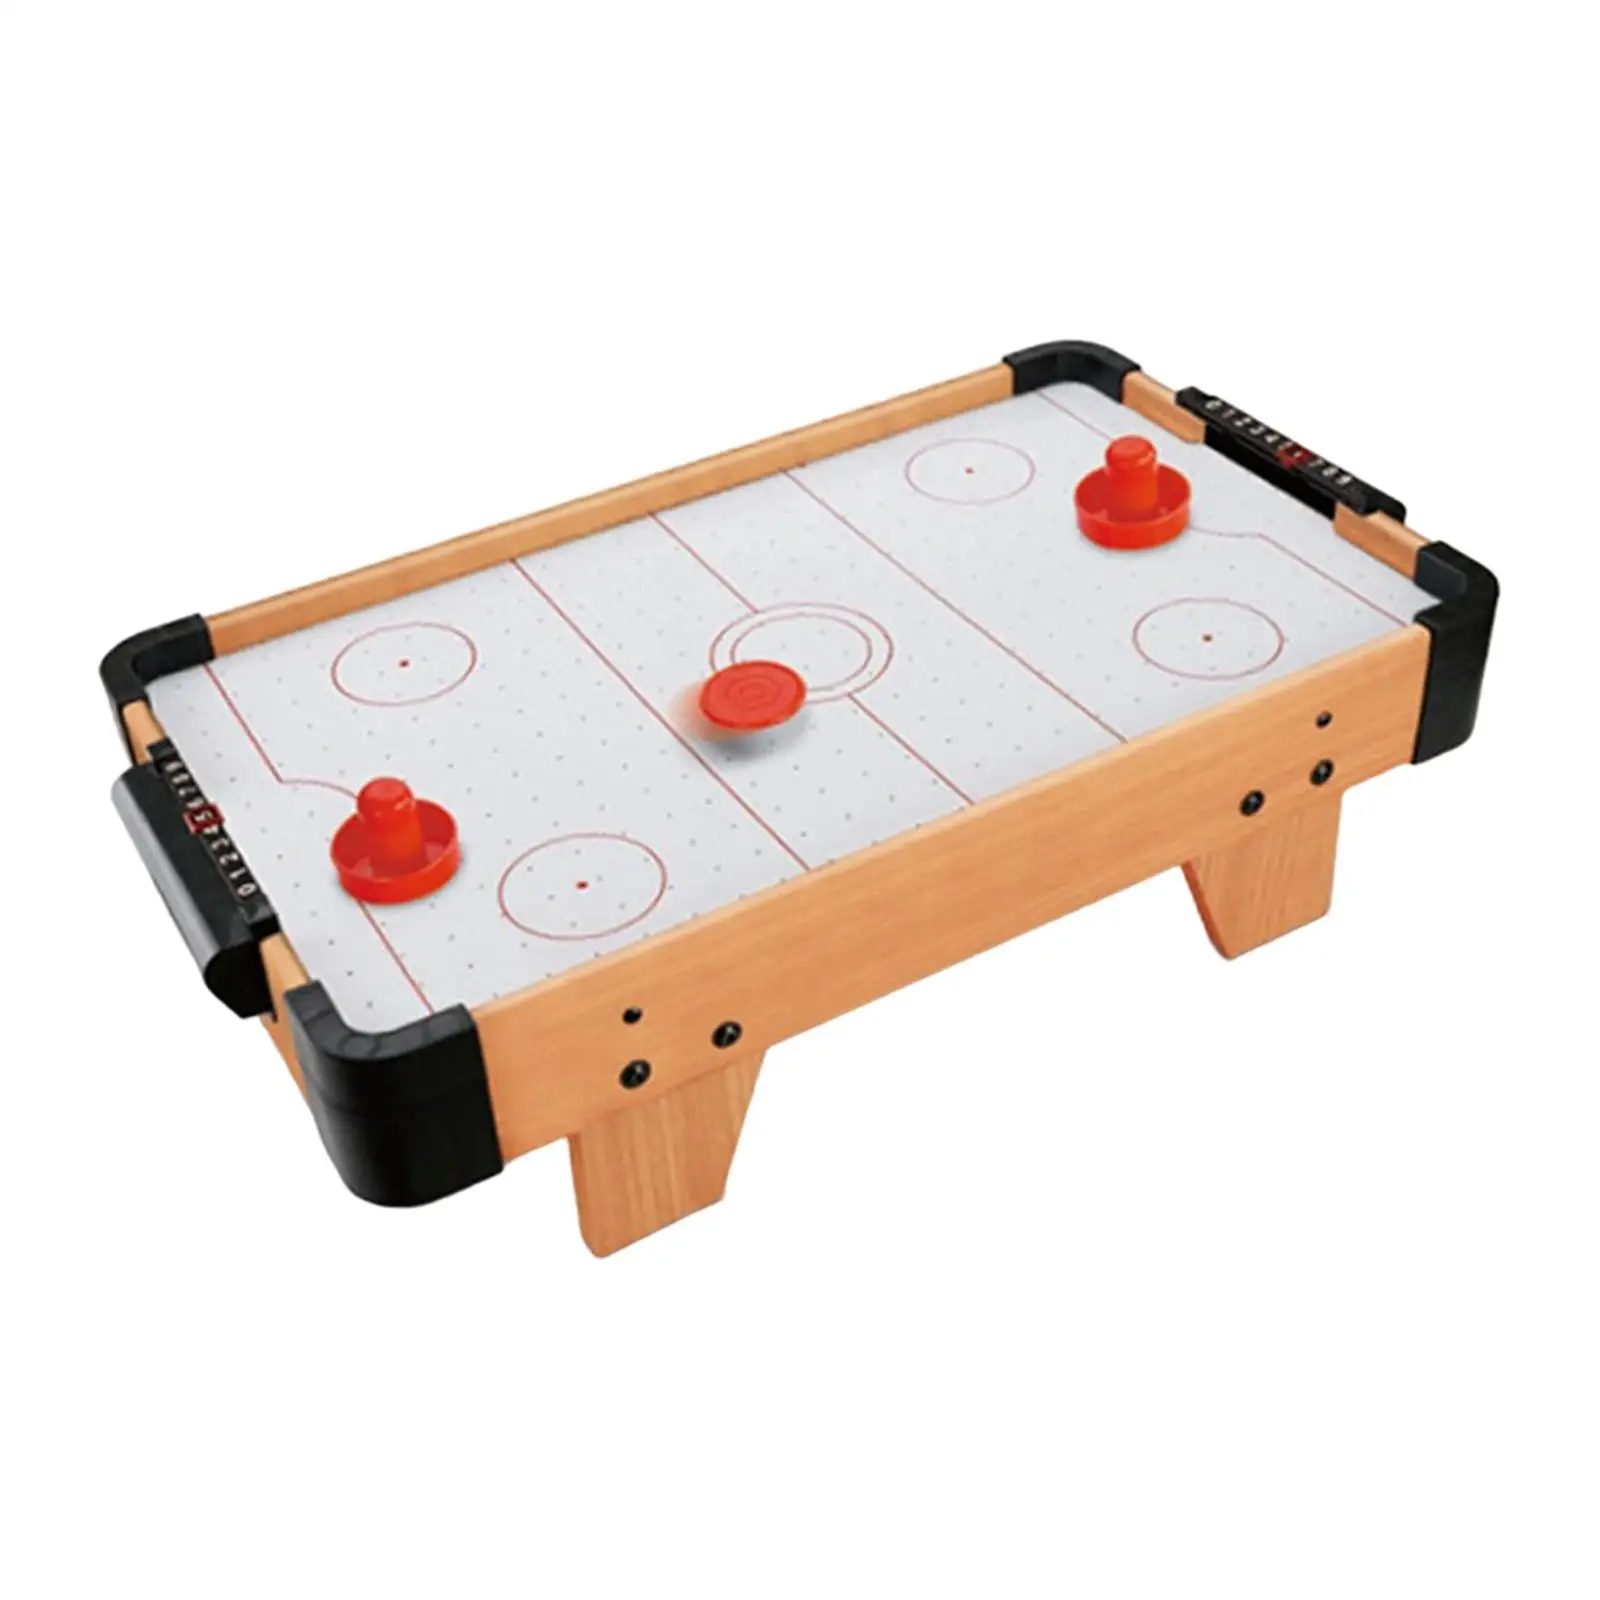 Mini Air Hockey Table Paced Winner Board Game Family Game for Adults Girls Boys